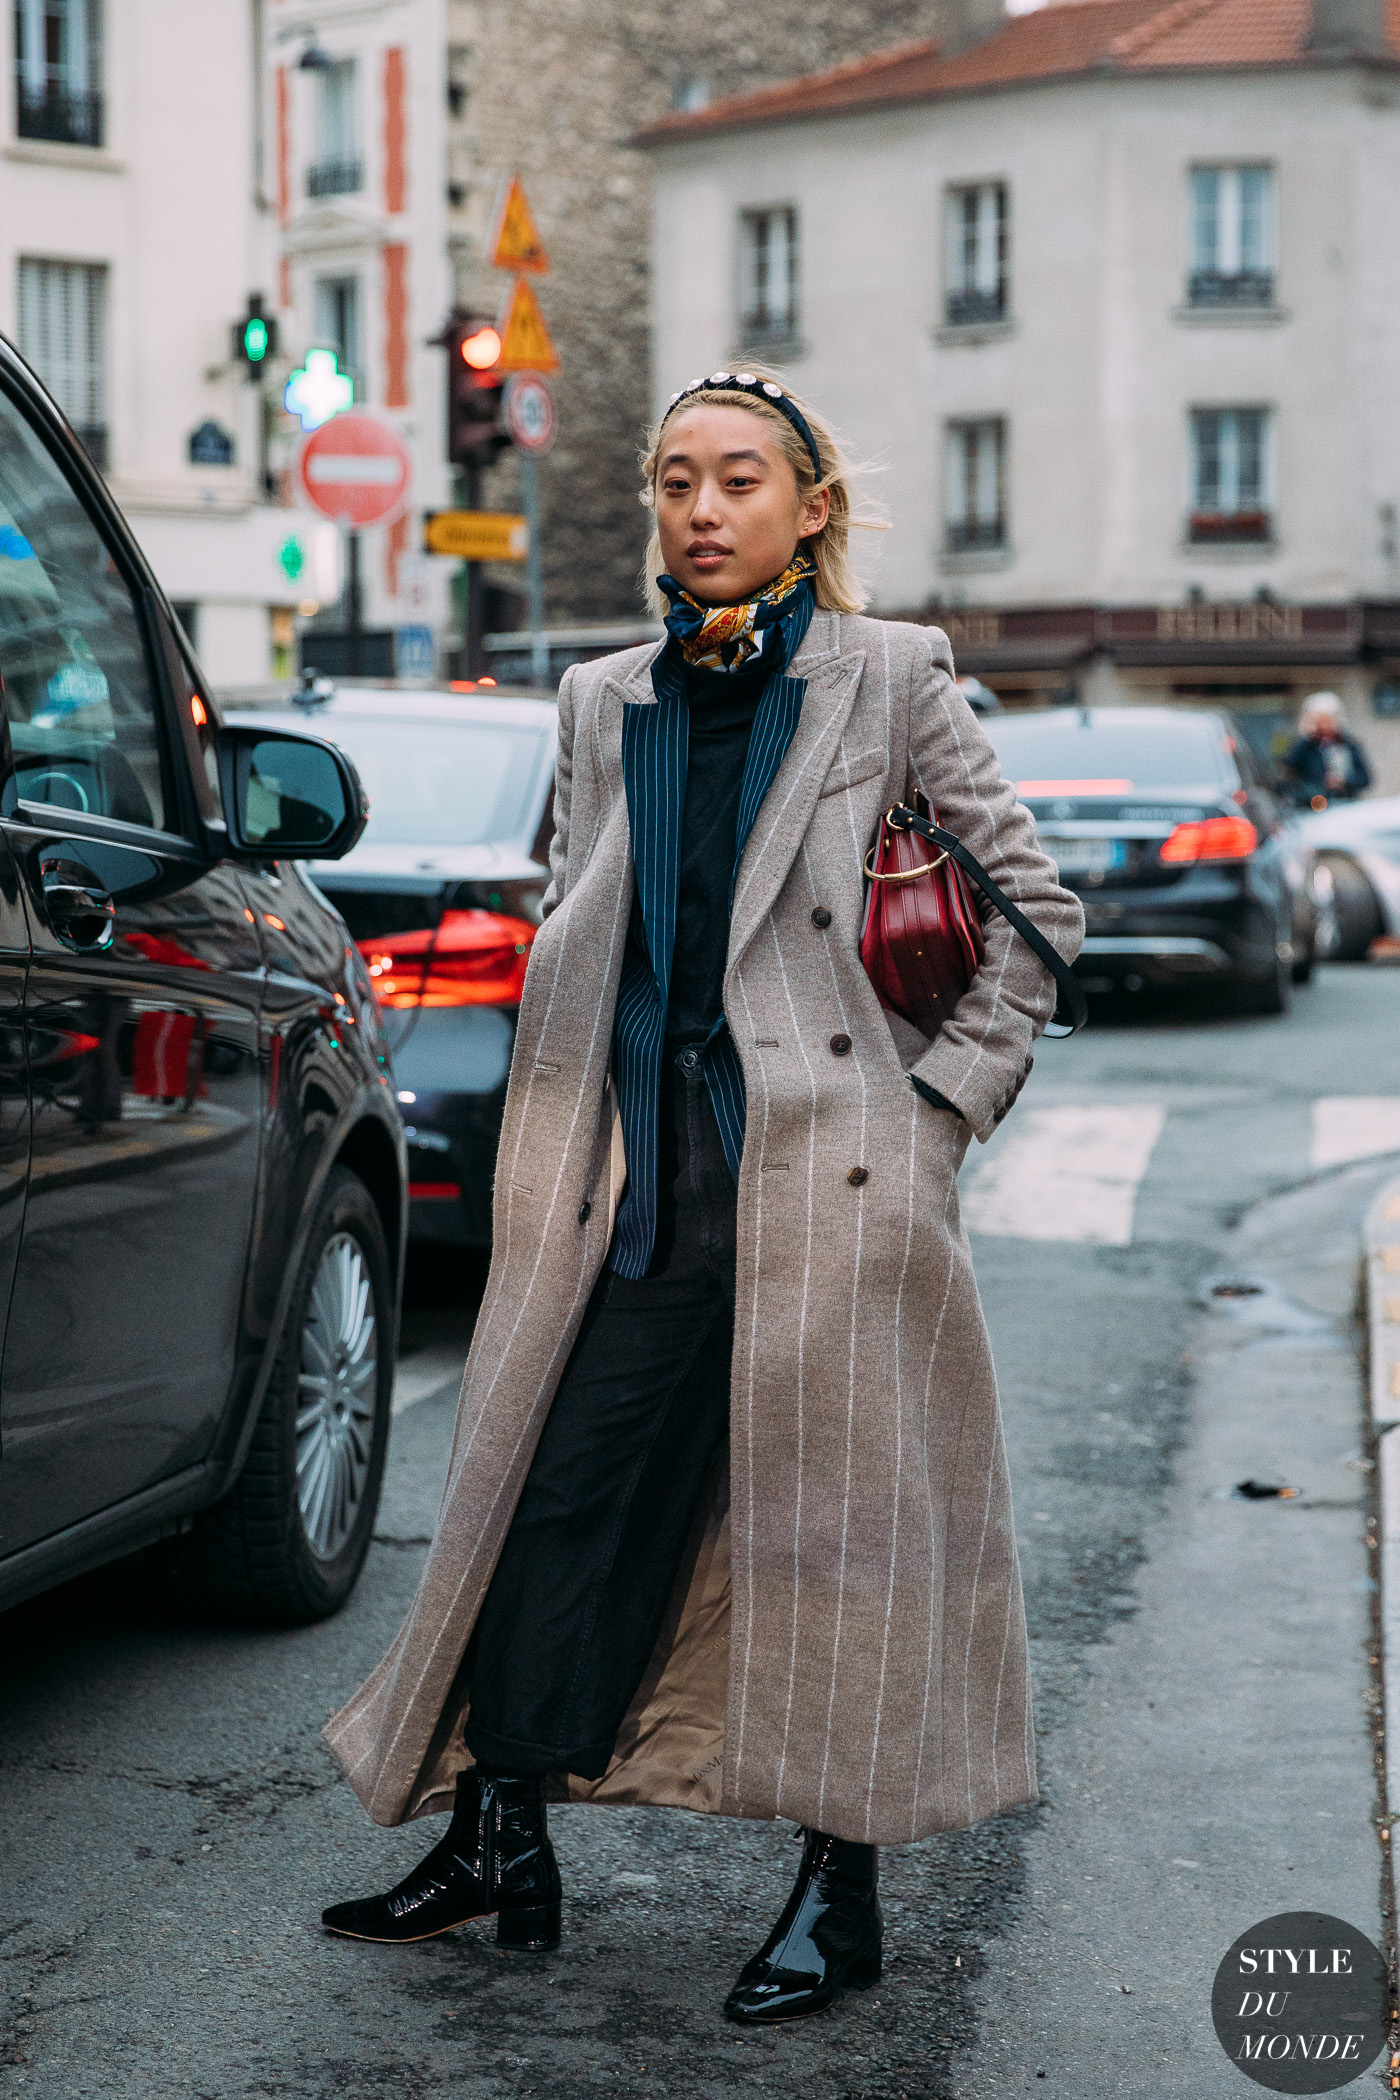 Margaret Zhang by STYLEDUMONDE Street Style Fashion Photography FW18 20180301_48A4875